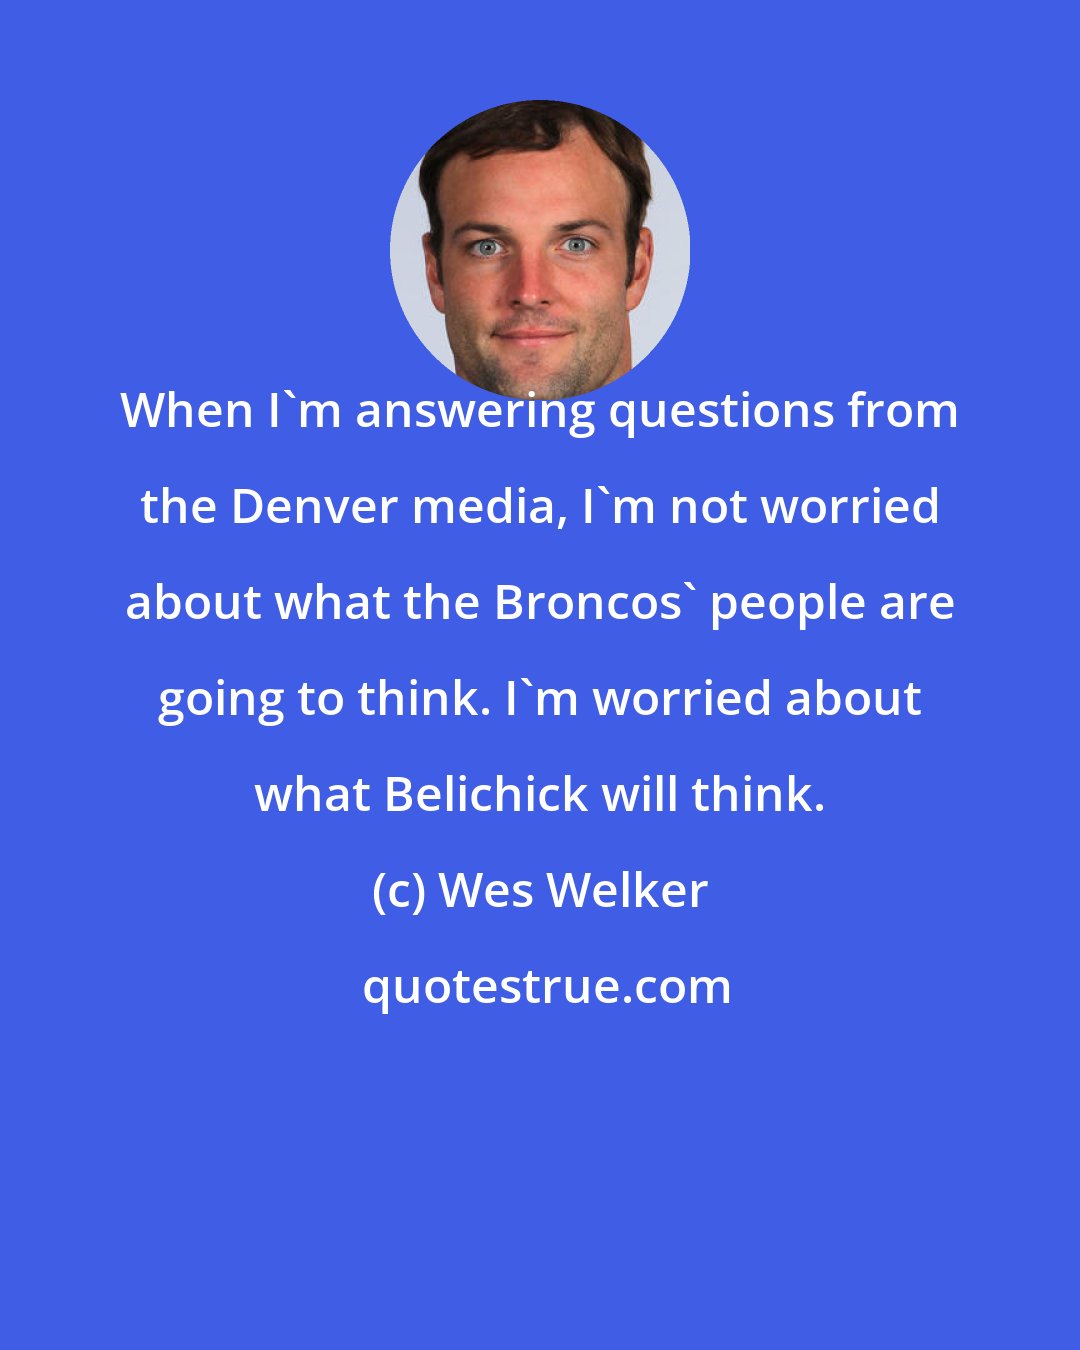 Wes Welker: When I'm answering questions from the Denver media, I'm not worried about what the Broncos' people are going to think. I'm worried about what Belichick will think.